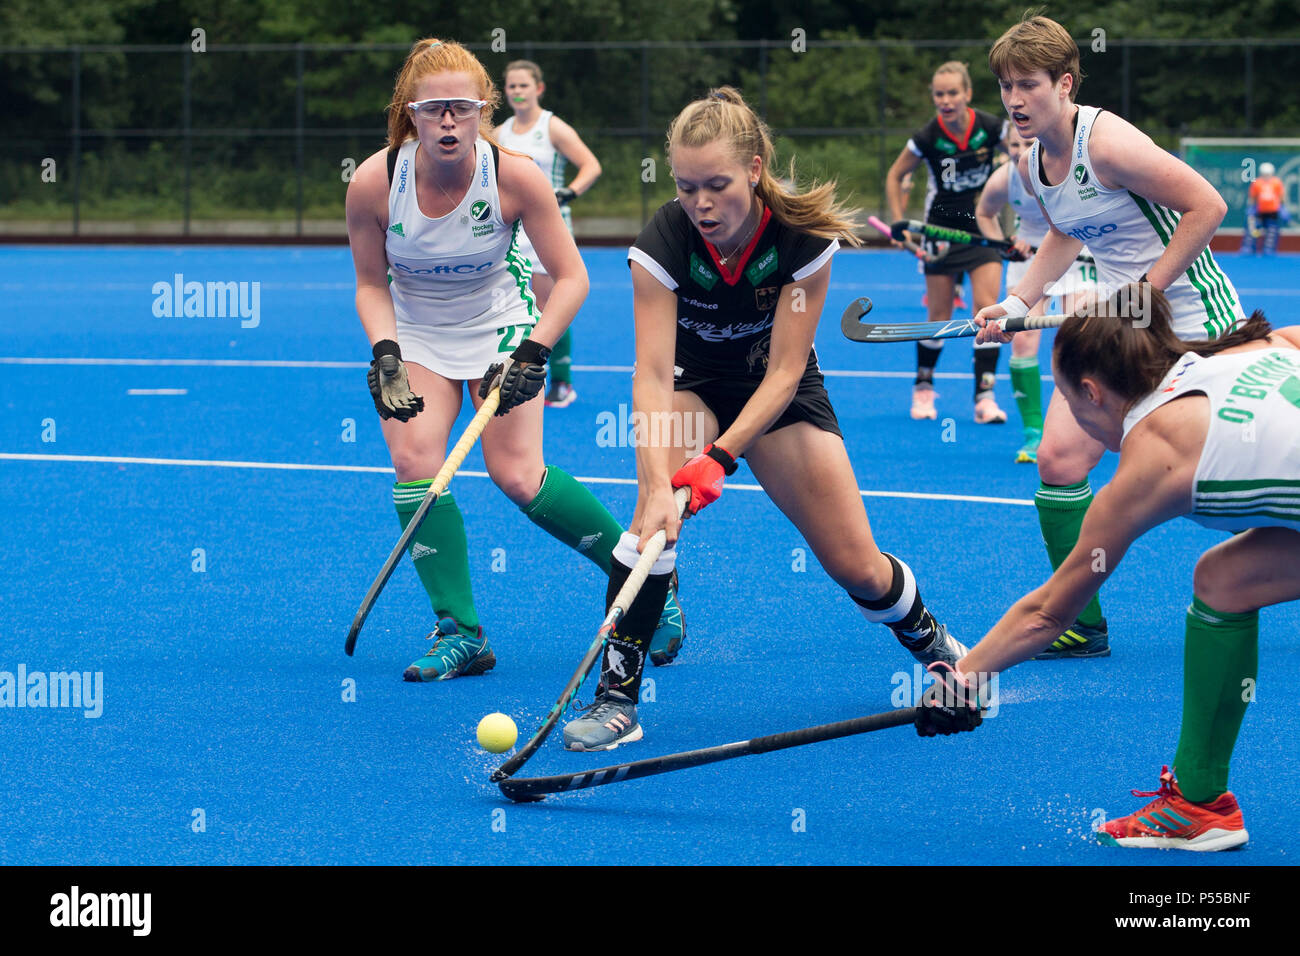 Velbert, Deutschland. 24th June, 2018. Lena MICHEL (GER, mi.) In action on the ball, in duels. Hockey, DHB, Women's National Team, Three Nations Tournament, World Cup Preparation, Laenderspiel, Germany (GER) - Ireland (IRL), 3: 0, on 24.06.2018 in Velbert/Germany. | usage worldwide Credit: dpa/Alamy Live News Stock Photo